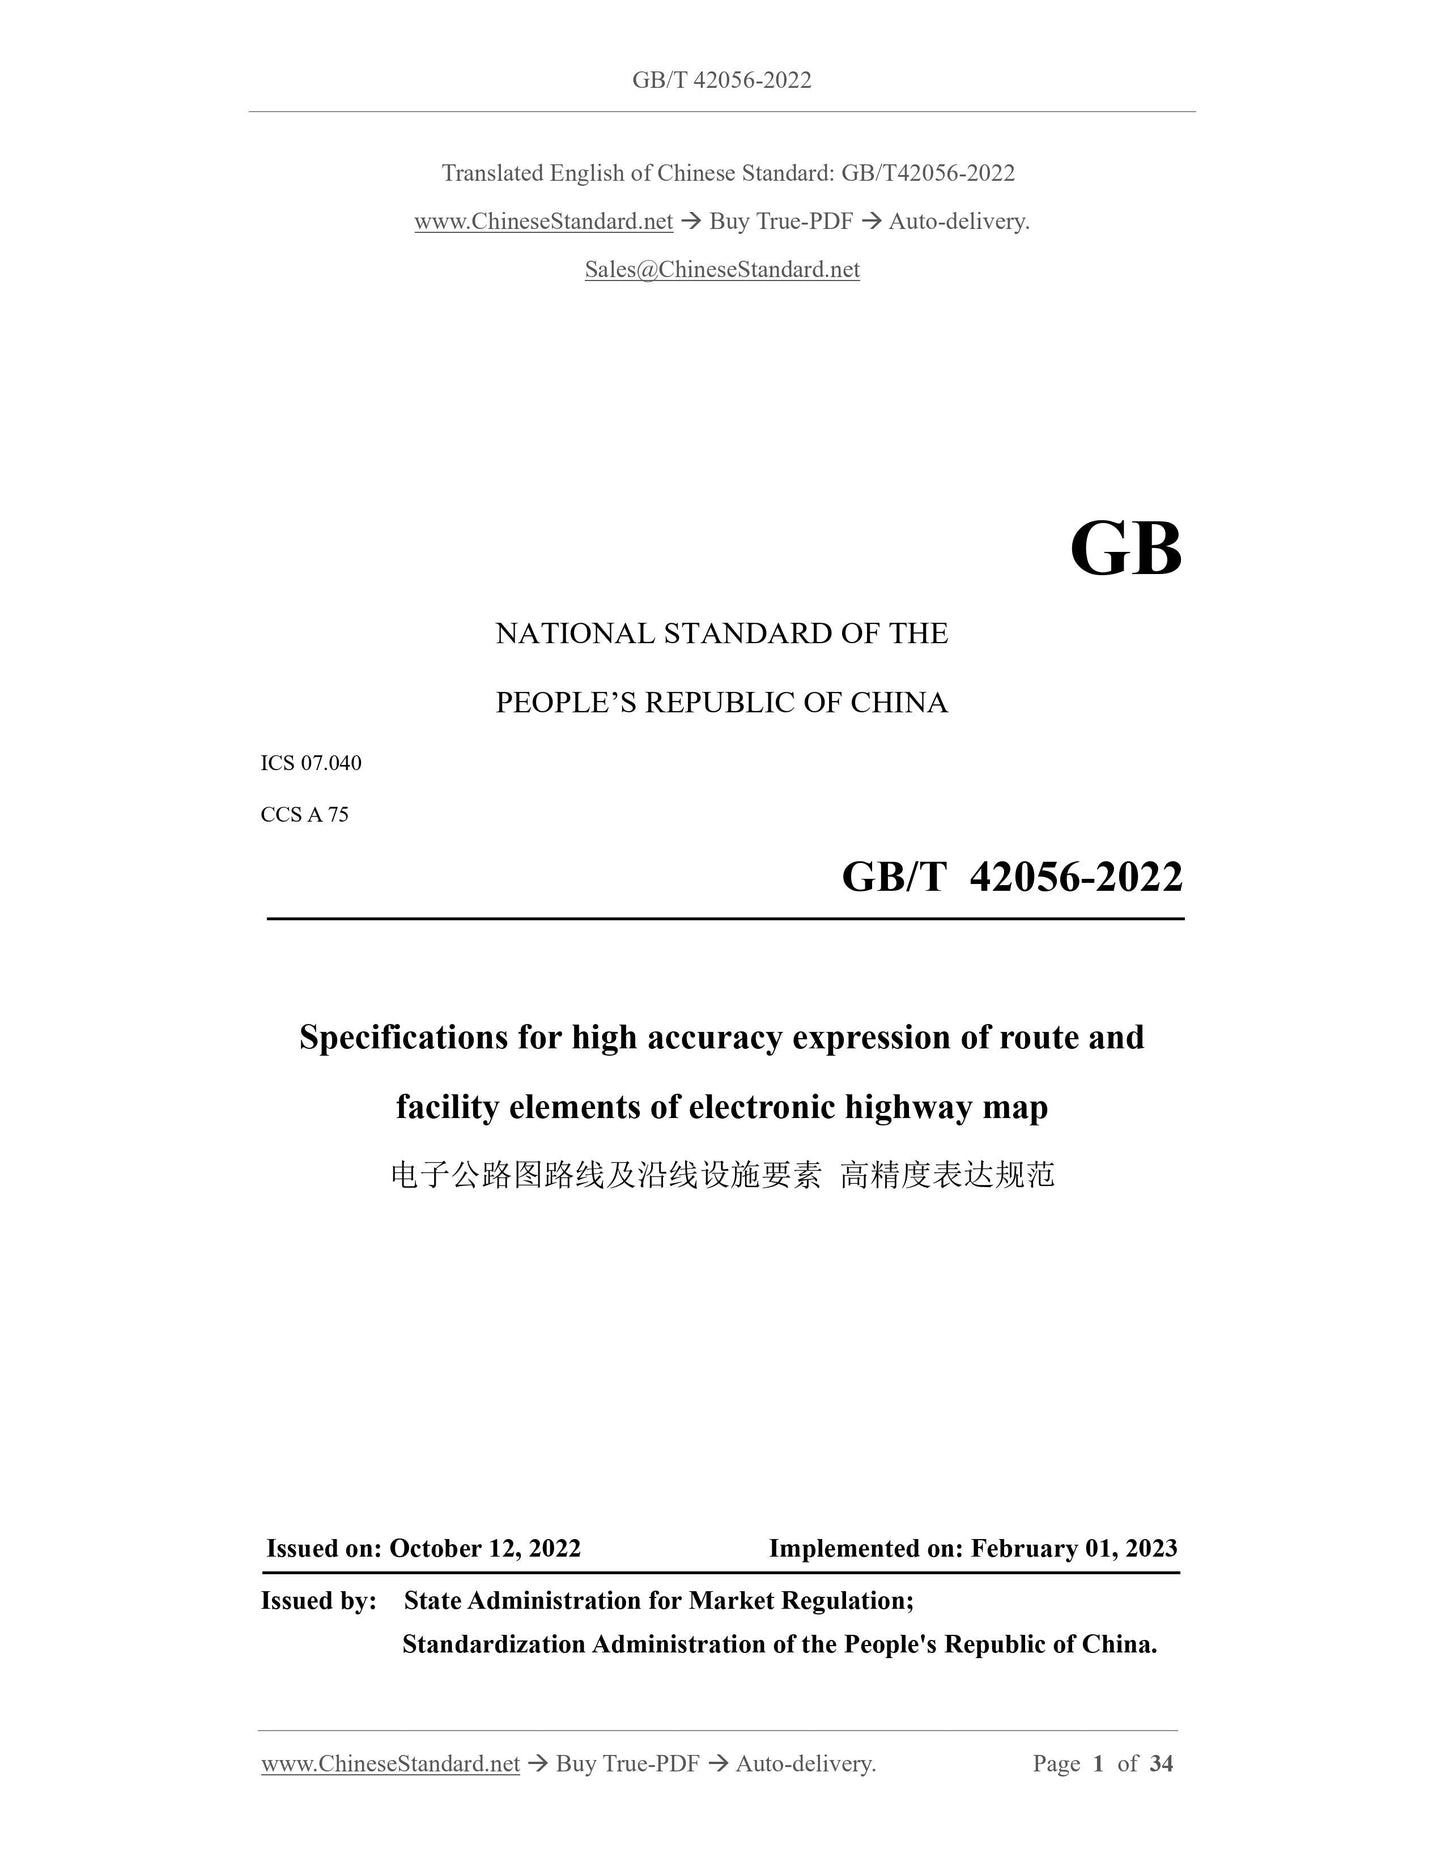 GB/T 42056-2022 Page 1